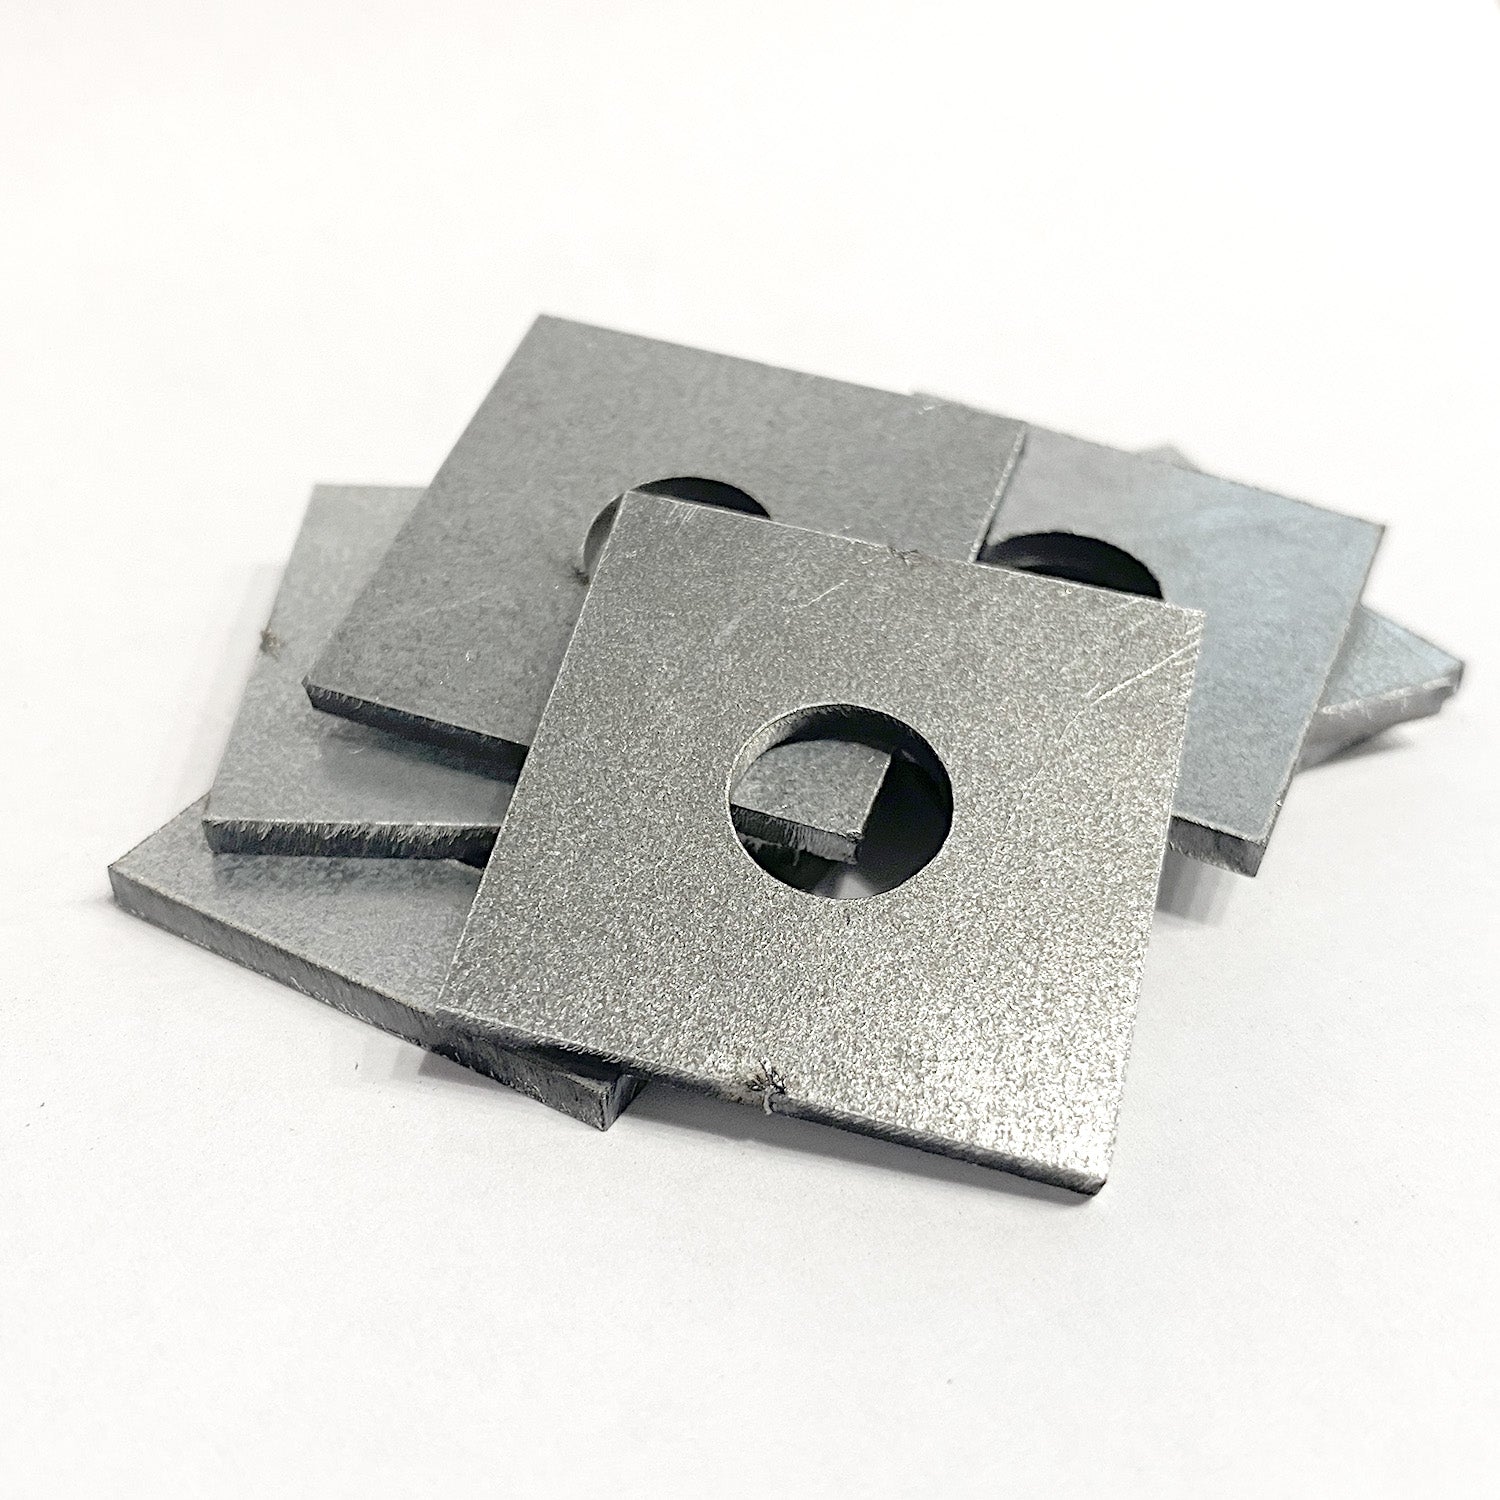 Square Washers on a pile with a white background